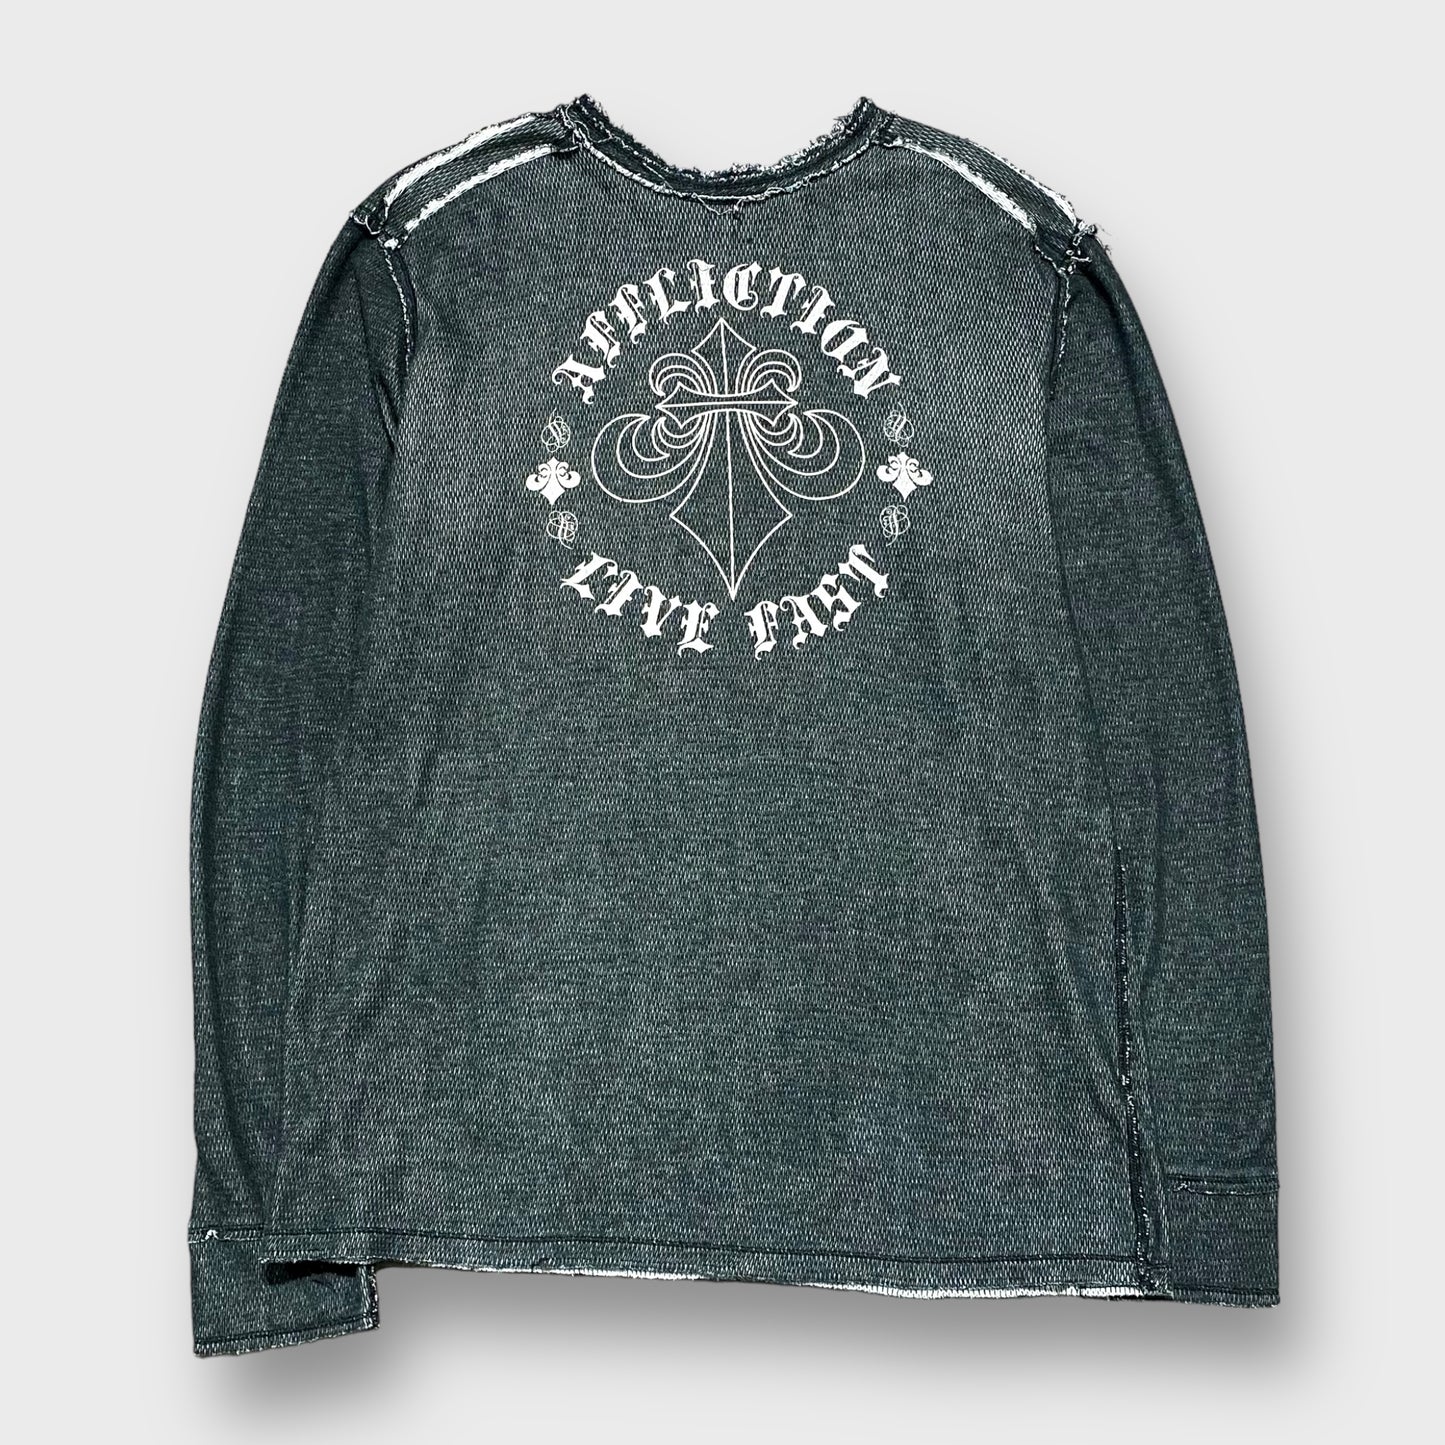 "Affliction" Wing design reversible thermal knit sweater